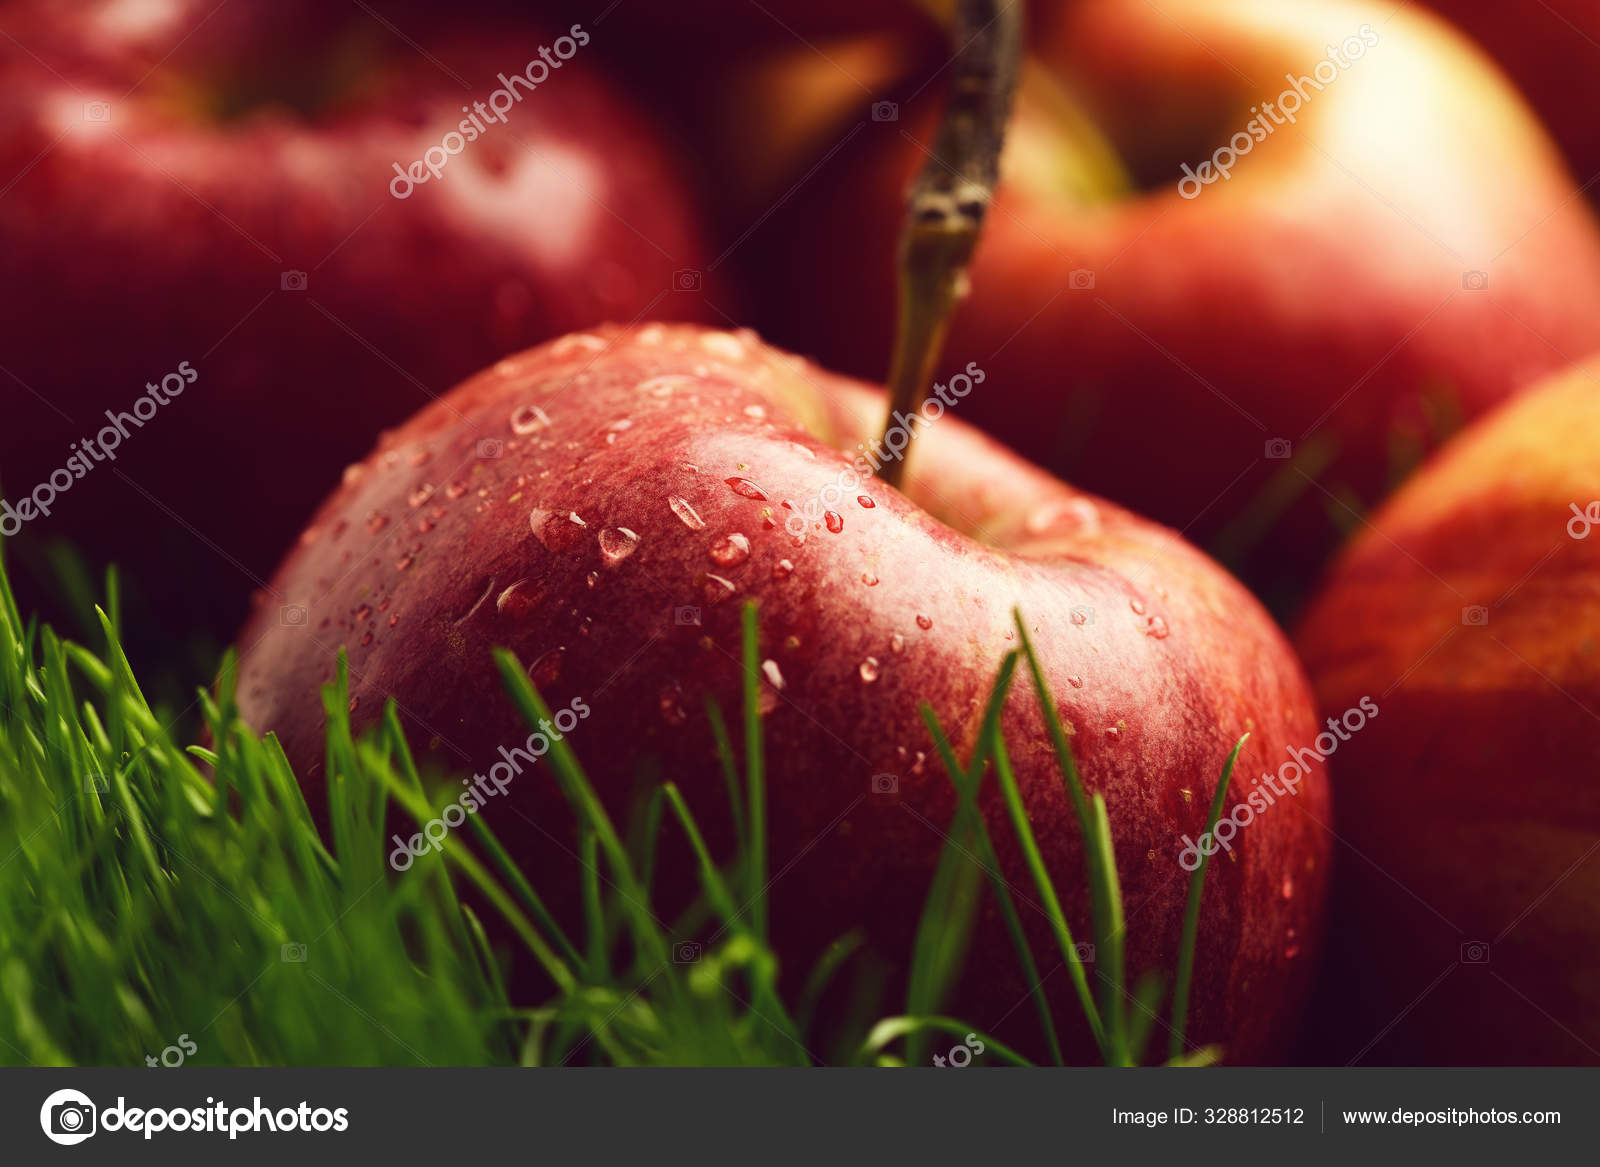 apple red color fallen on fresh green grass.